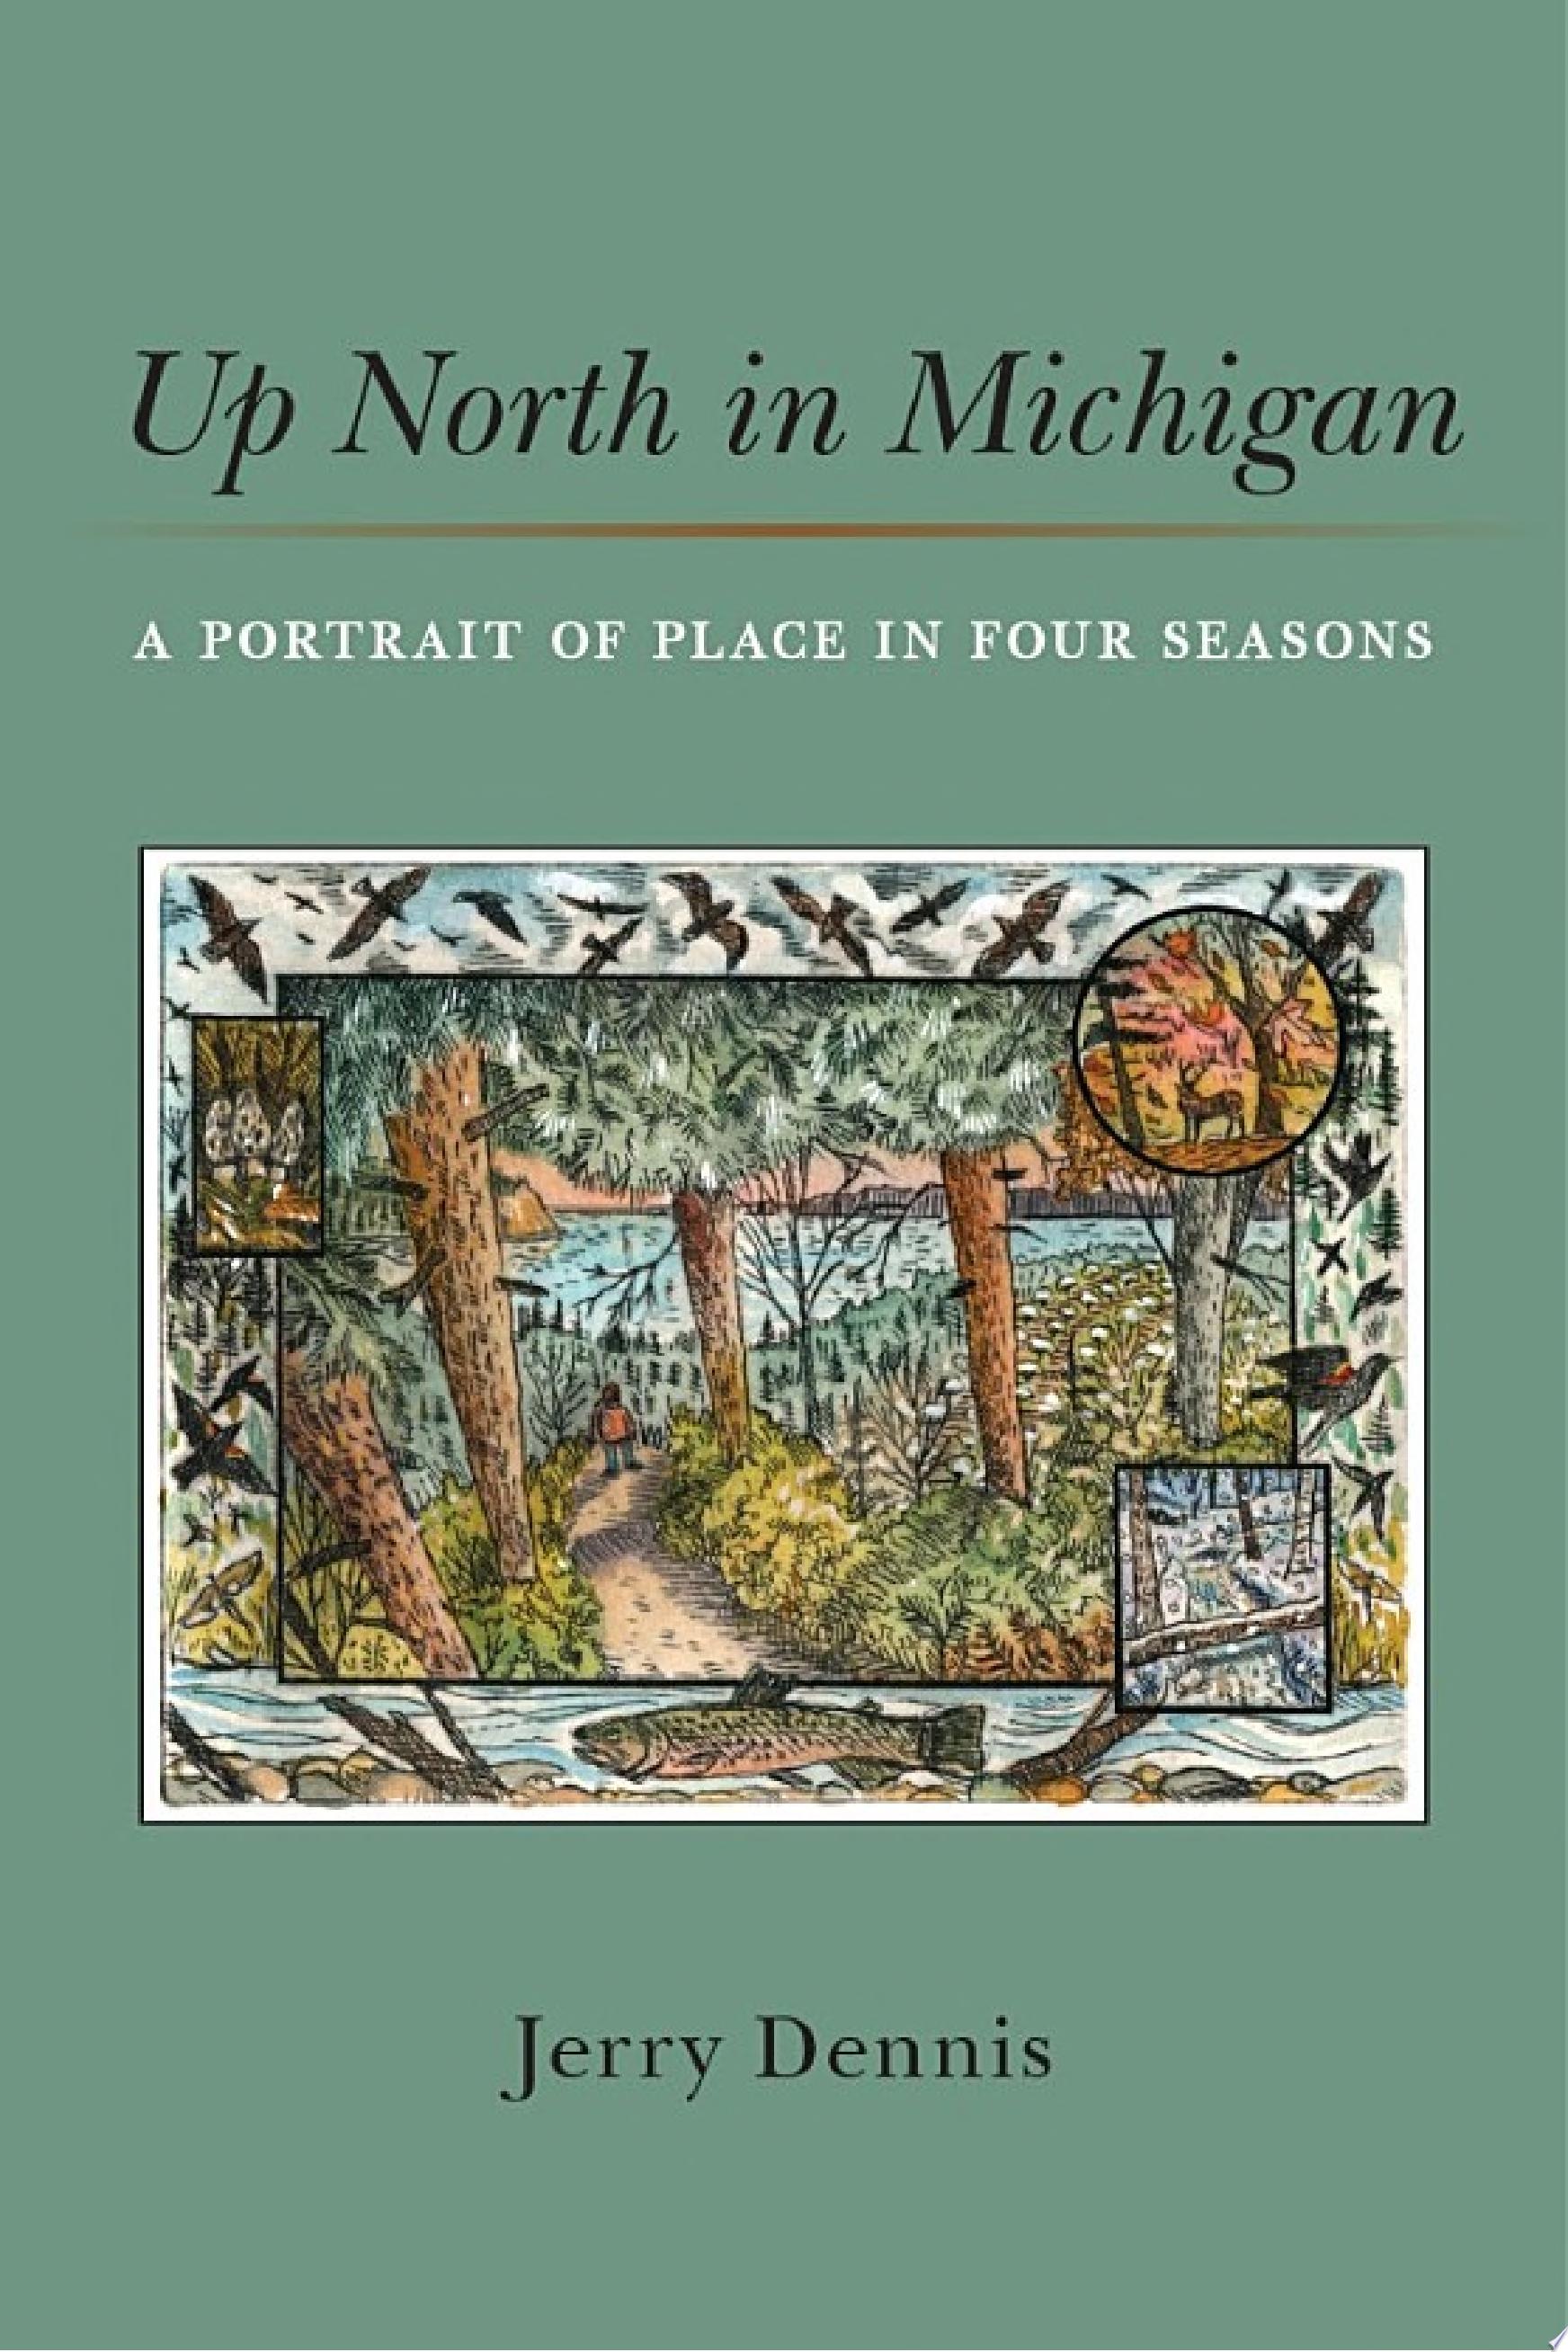 Image for "Up North in Michigan"